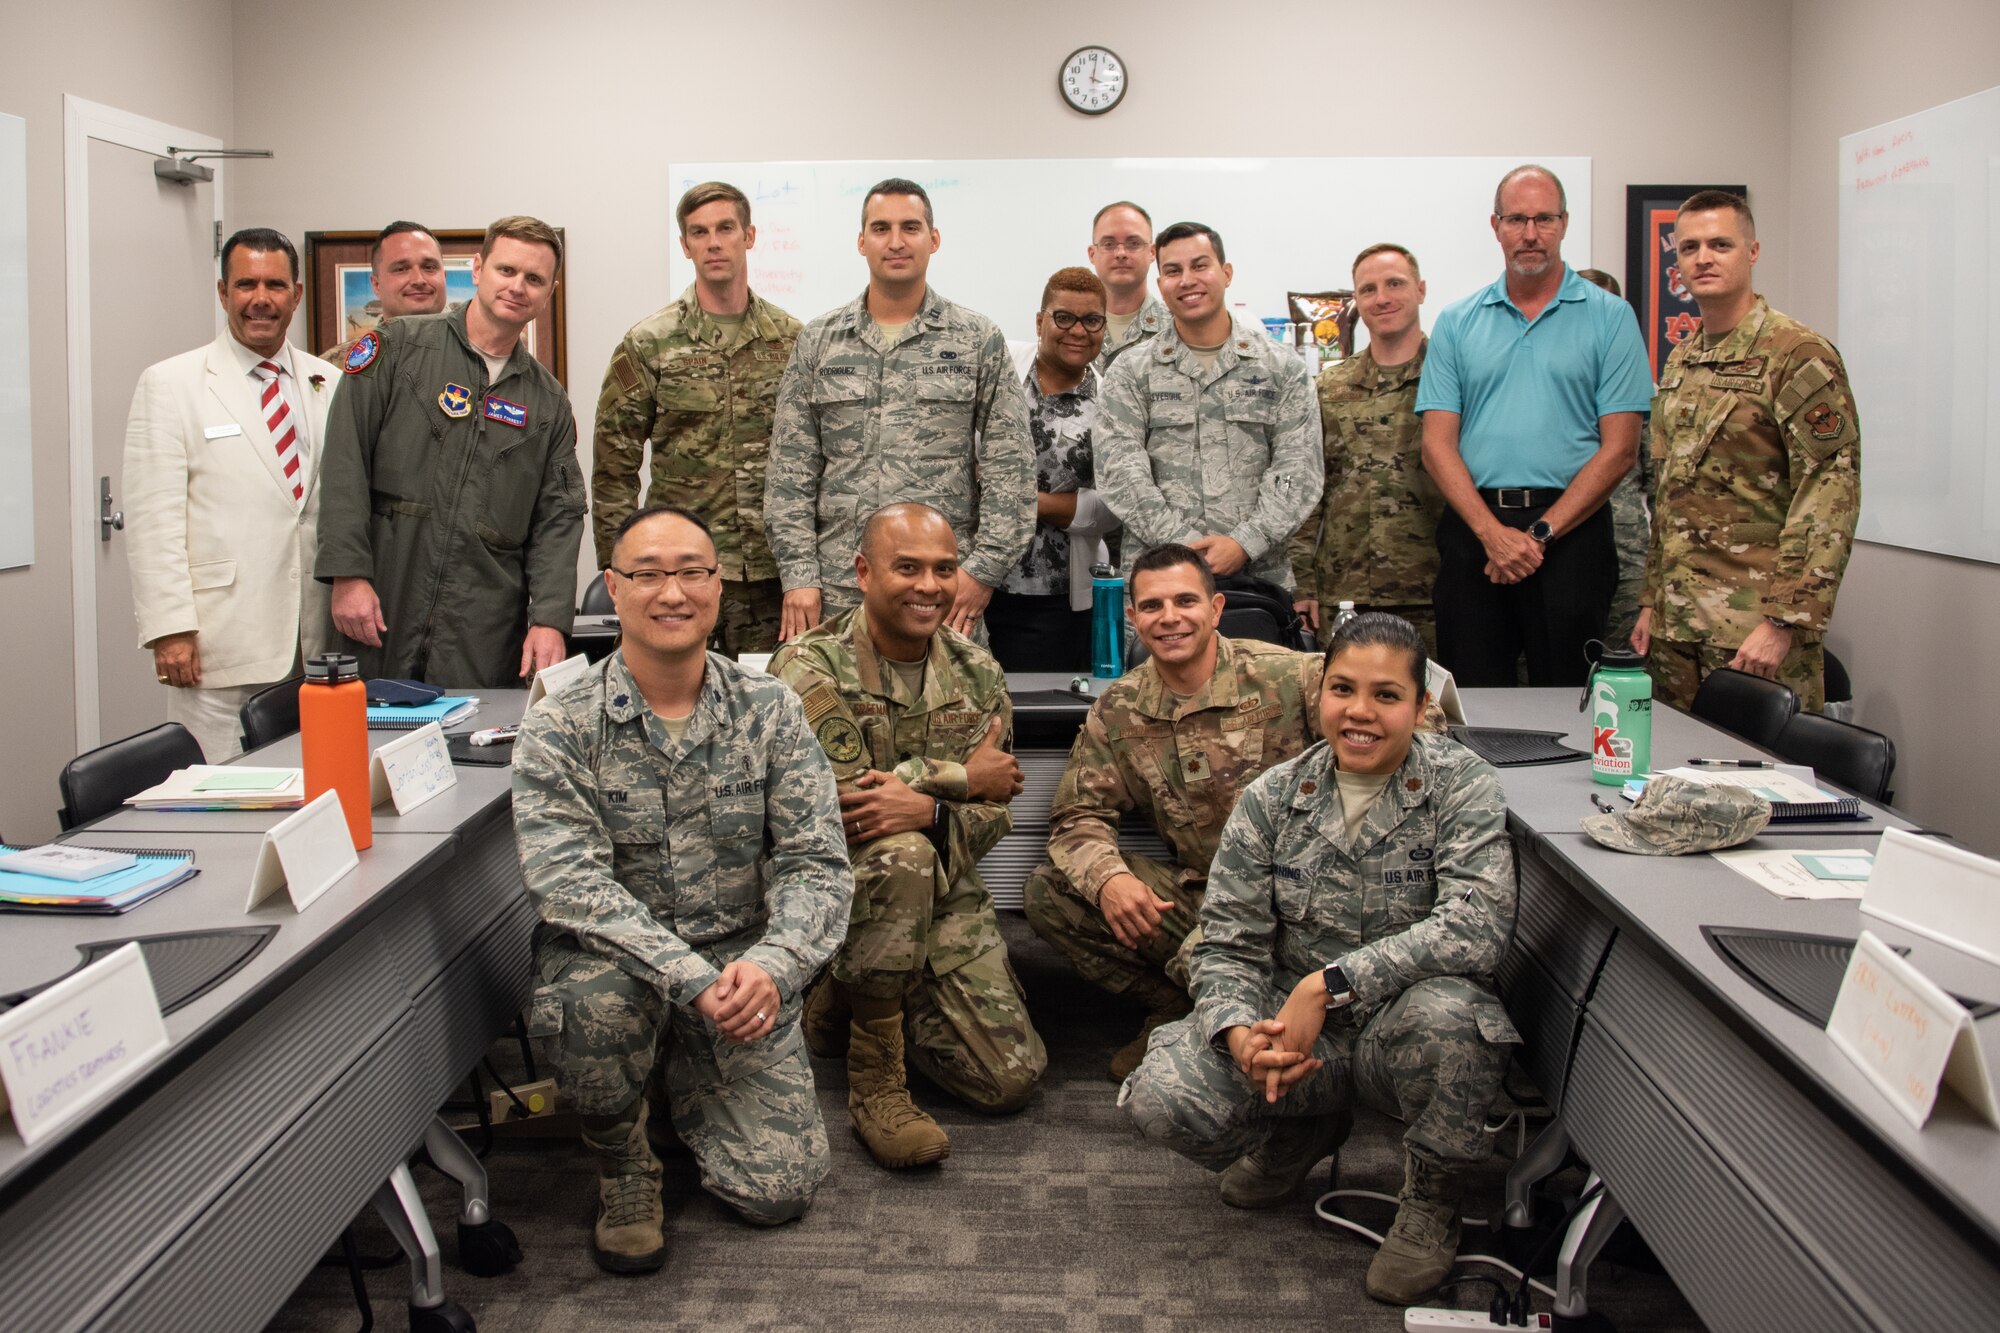 Graduates of Air University’s Leadership Development Course for Squadron Command pose for a group photo, Aug. 29, 2019, on Maxwell Air Force Base, Alabama. Maj. Richard Mottinelli, LDC graduate, said that having the perspective and mentorship from retired commanders and academic scholars helped give the students insight into leadership qualities, personality traits and communication tools that they haven’t gotten before from other professional military education courses.